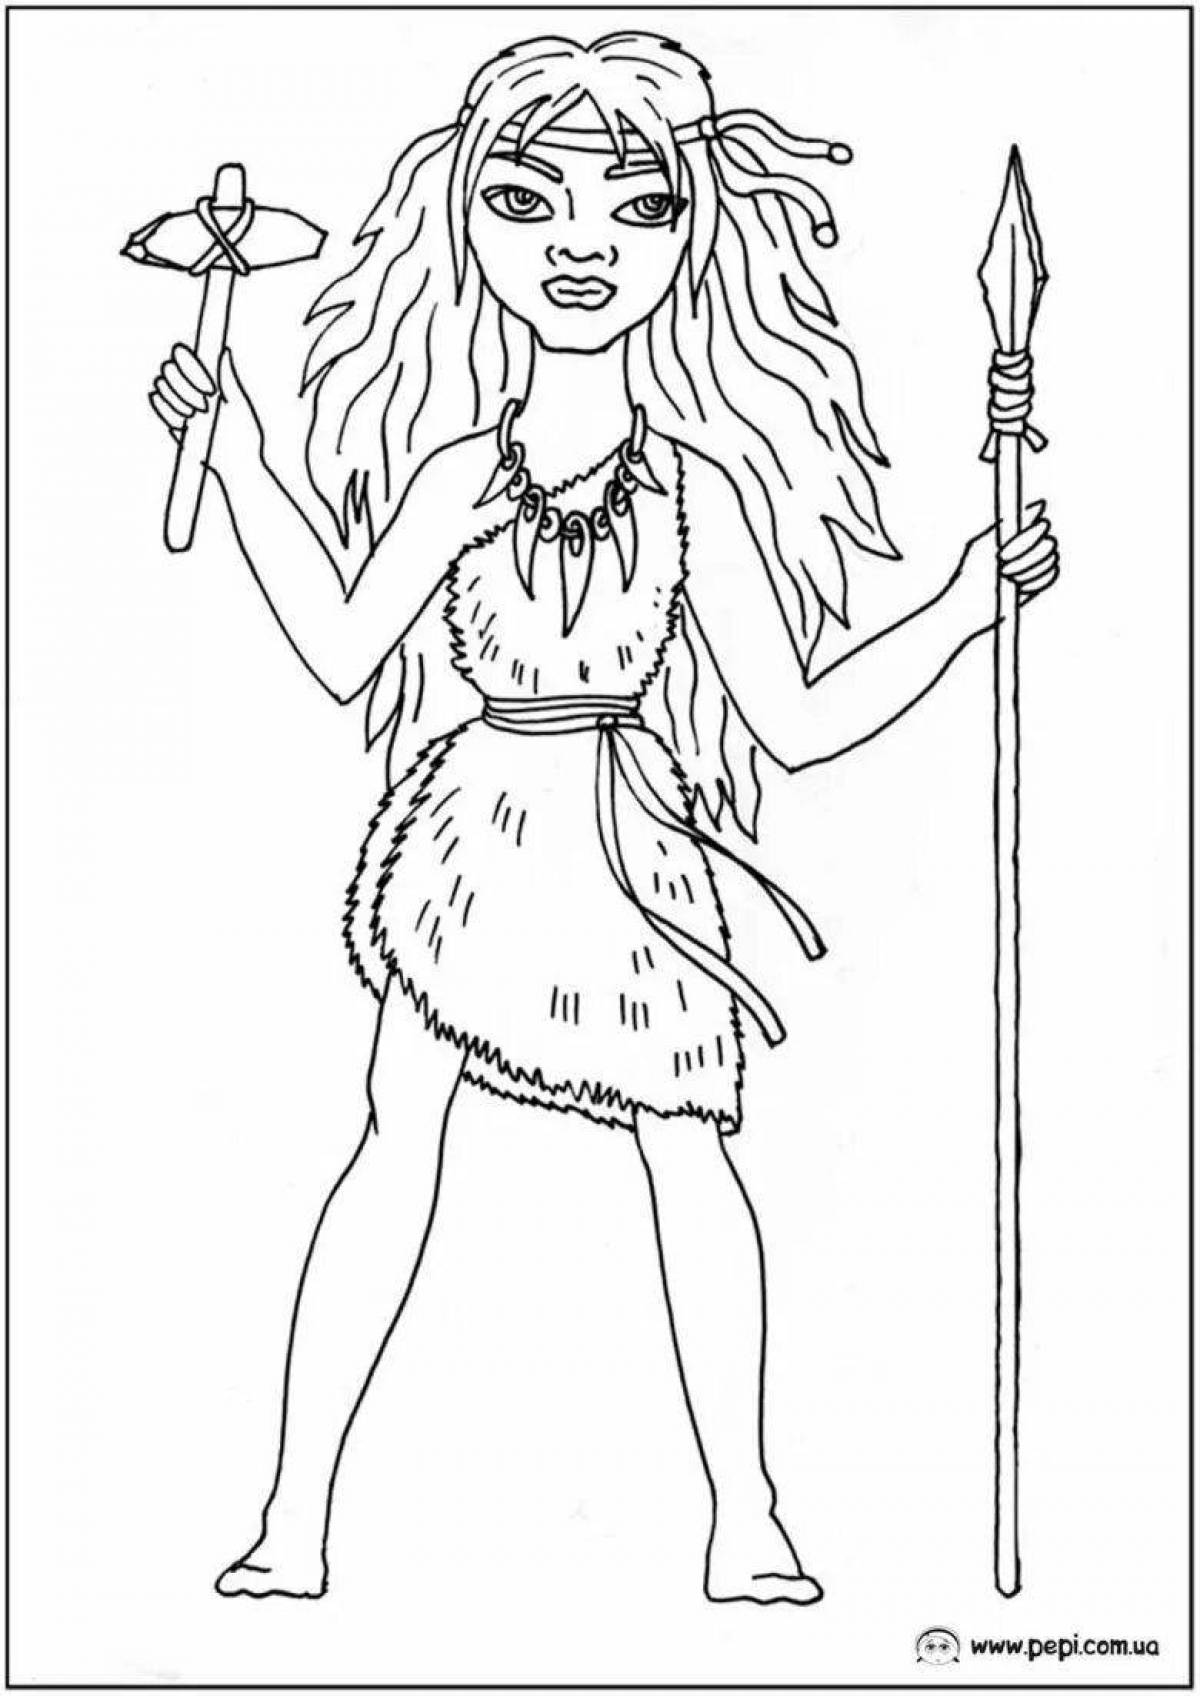 Magic coloring pages of ancient people